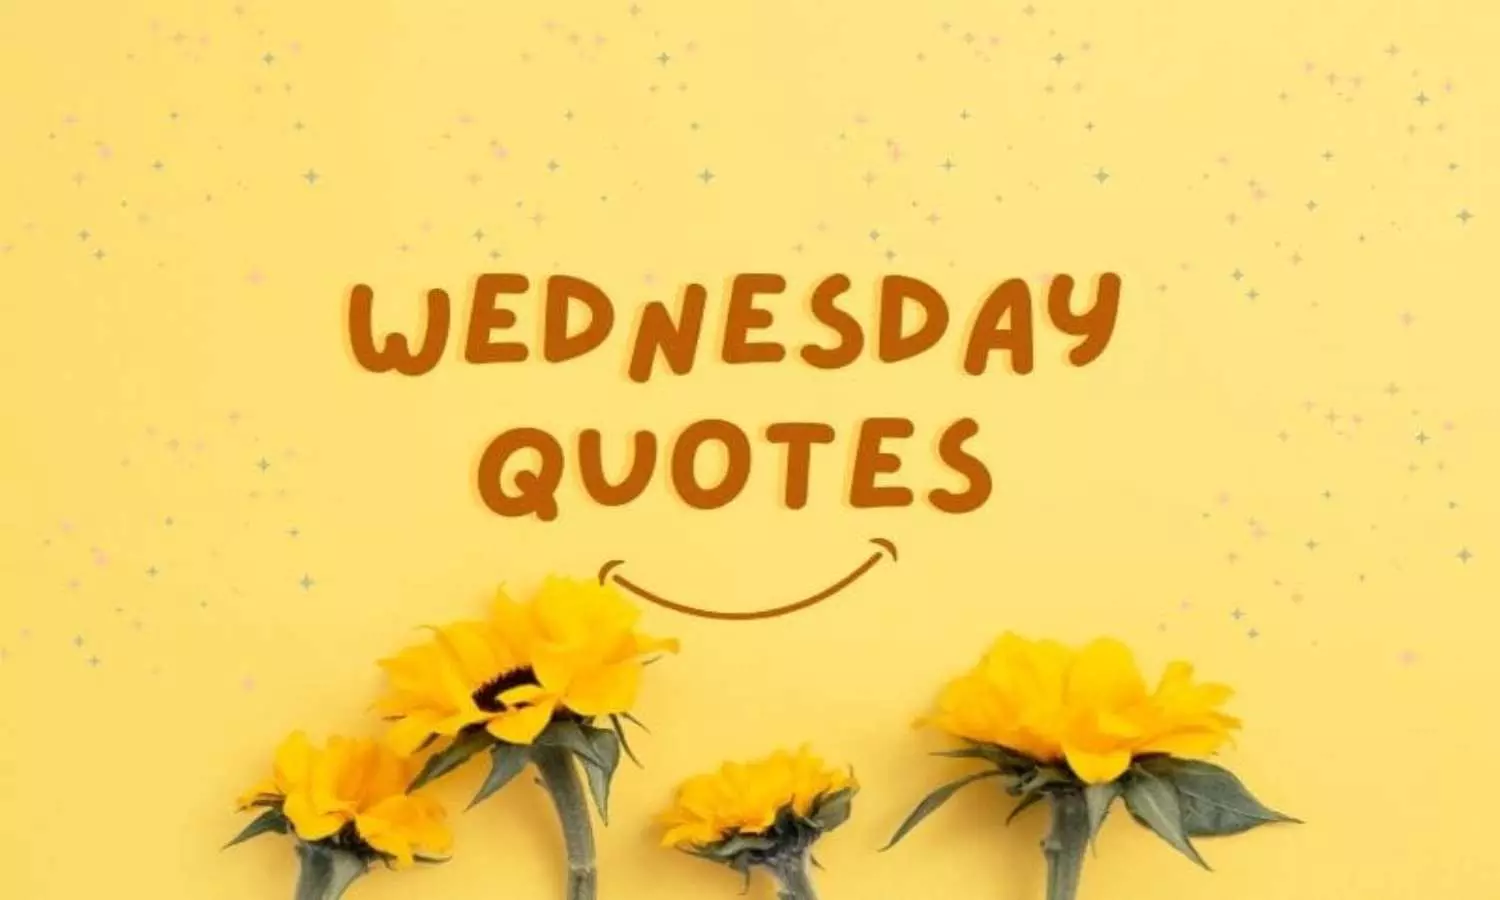 Wednesday Motivational Quotes